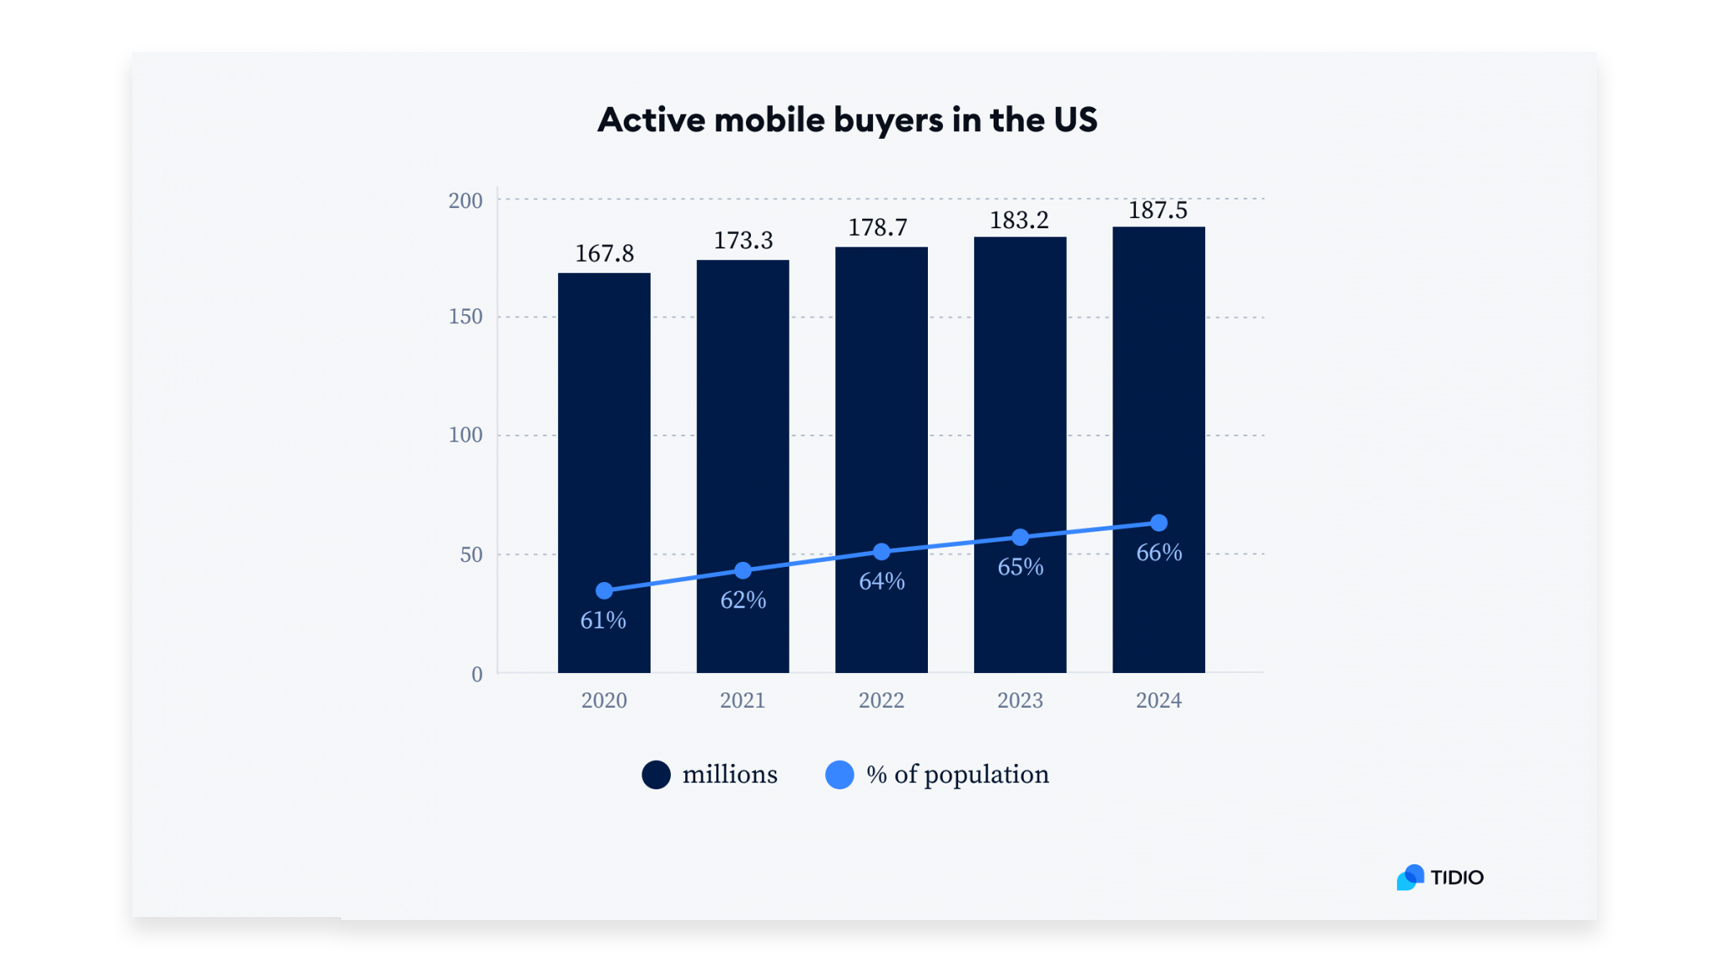 growing number of active mobile buyers over the next few years